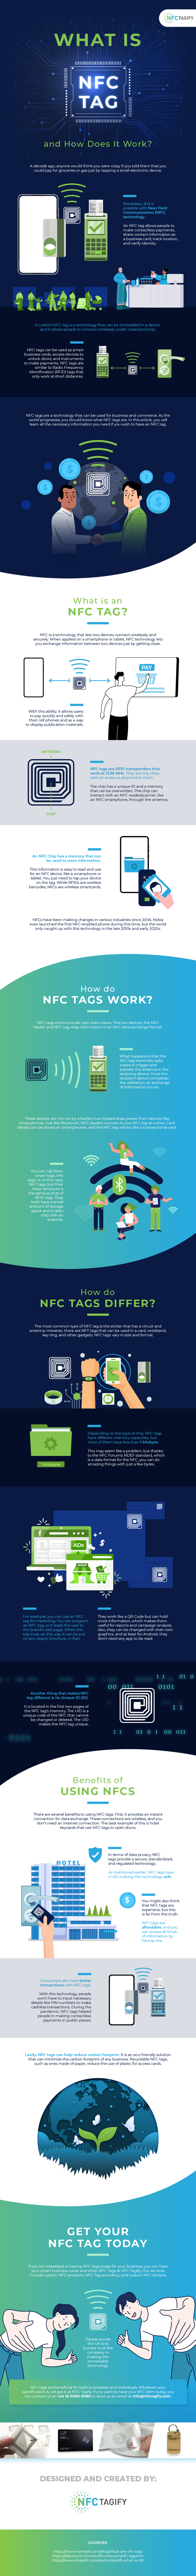 What is NFC Tag, and How Does It Work?